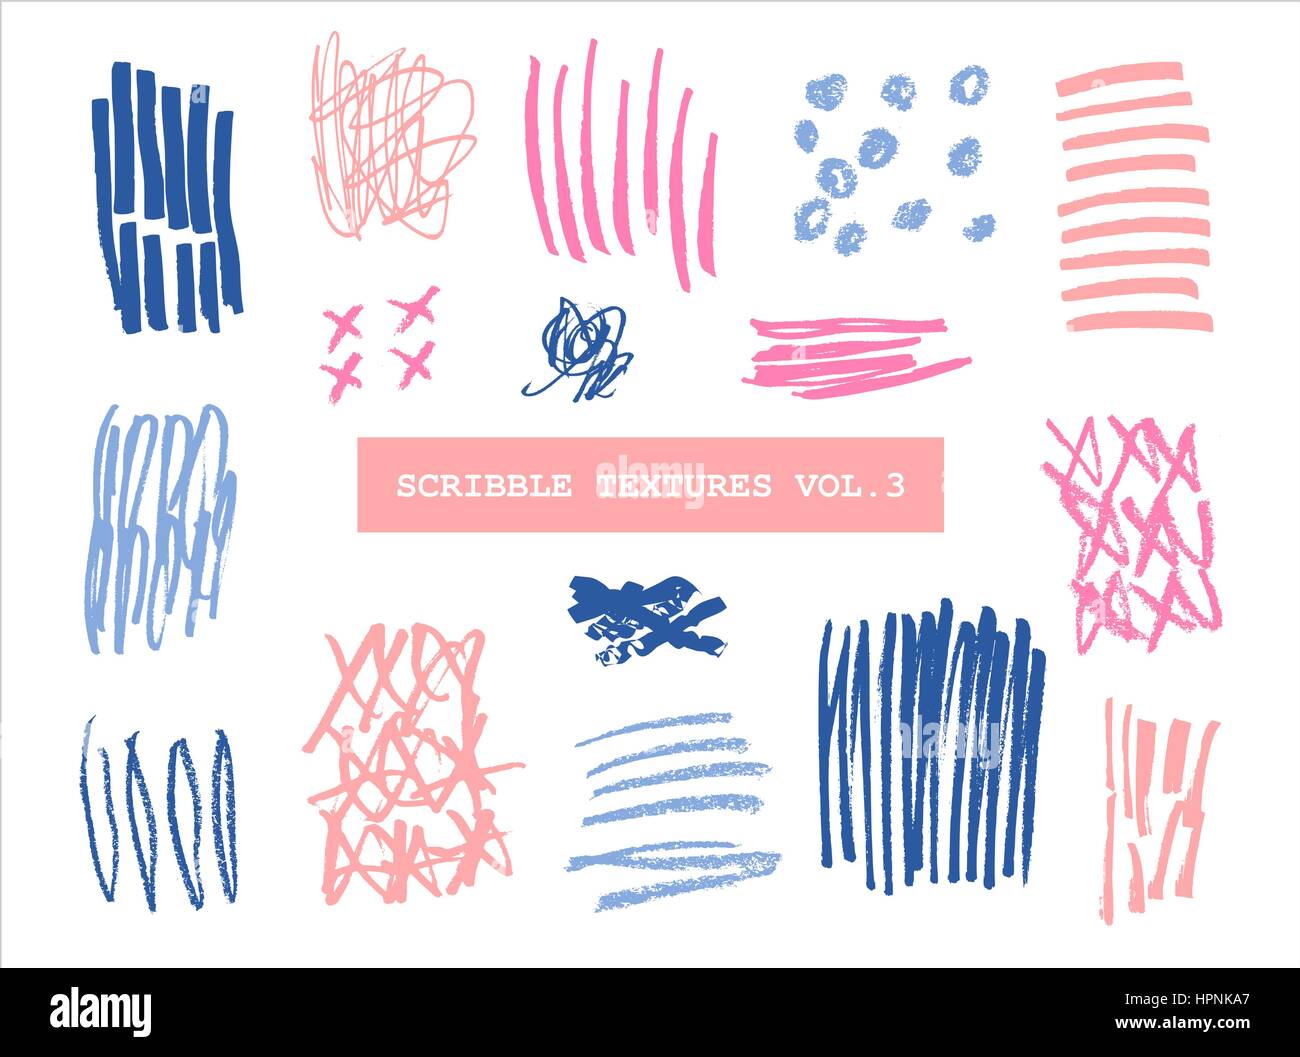 A set of hand drawn scribble textures in pastel colors isolated on white background. Stock Vector